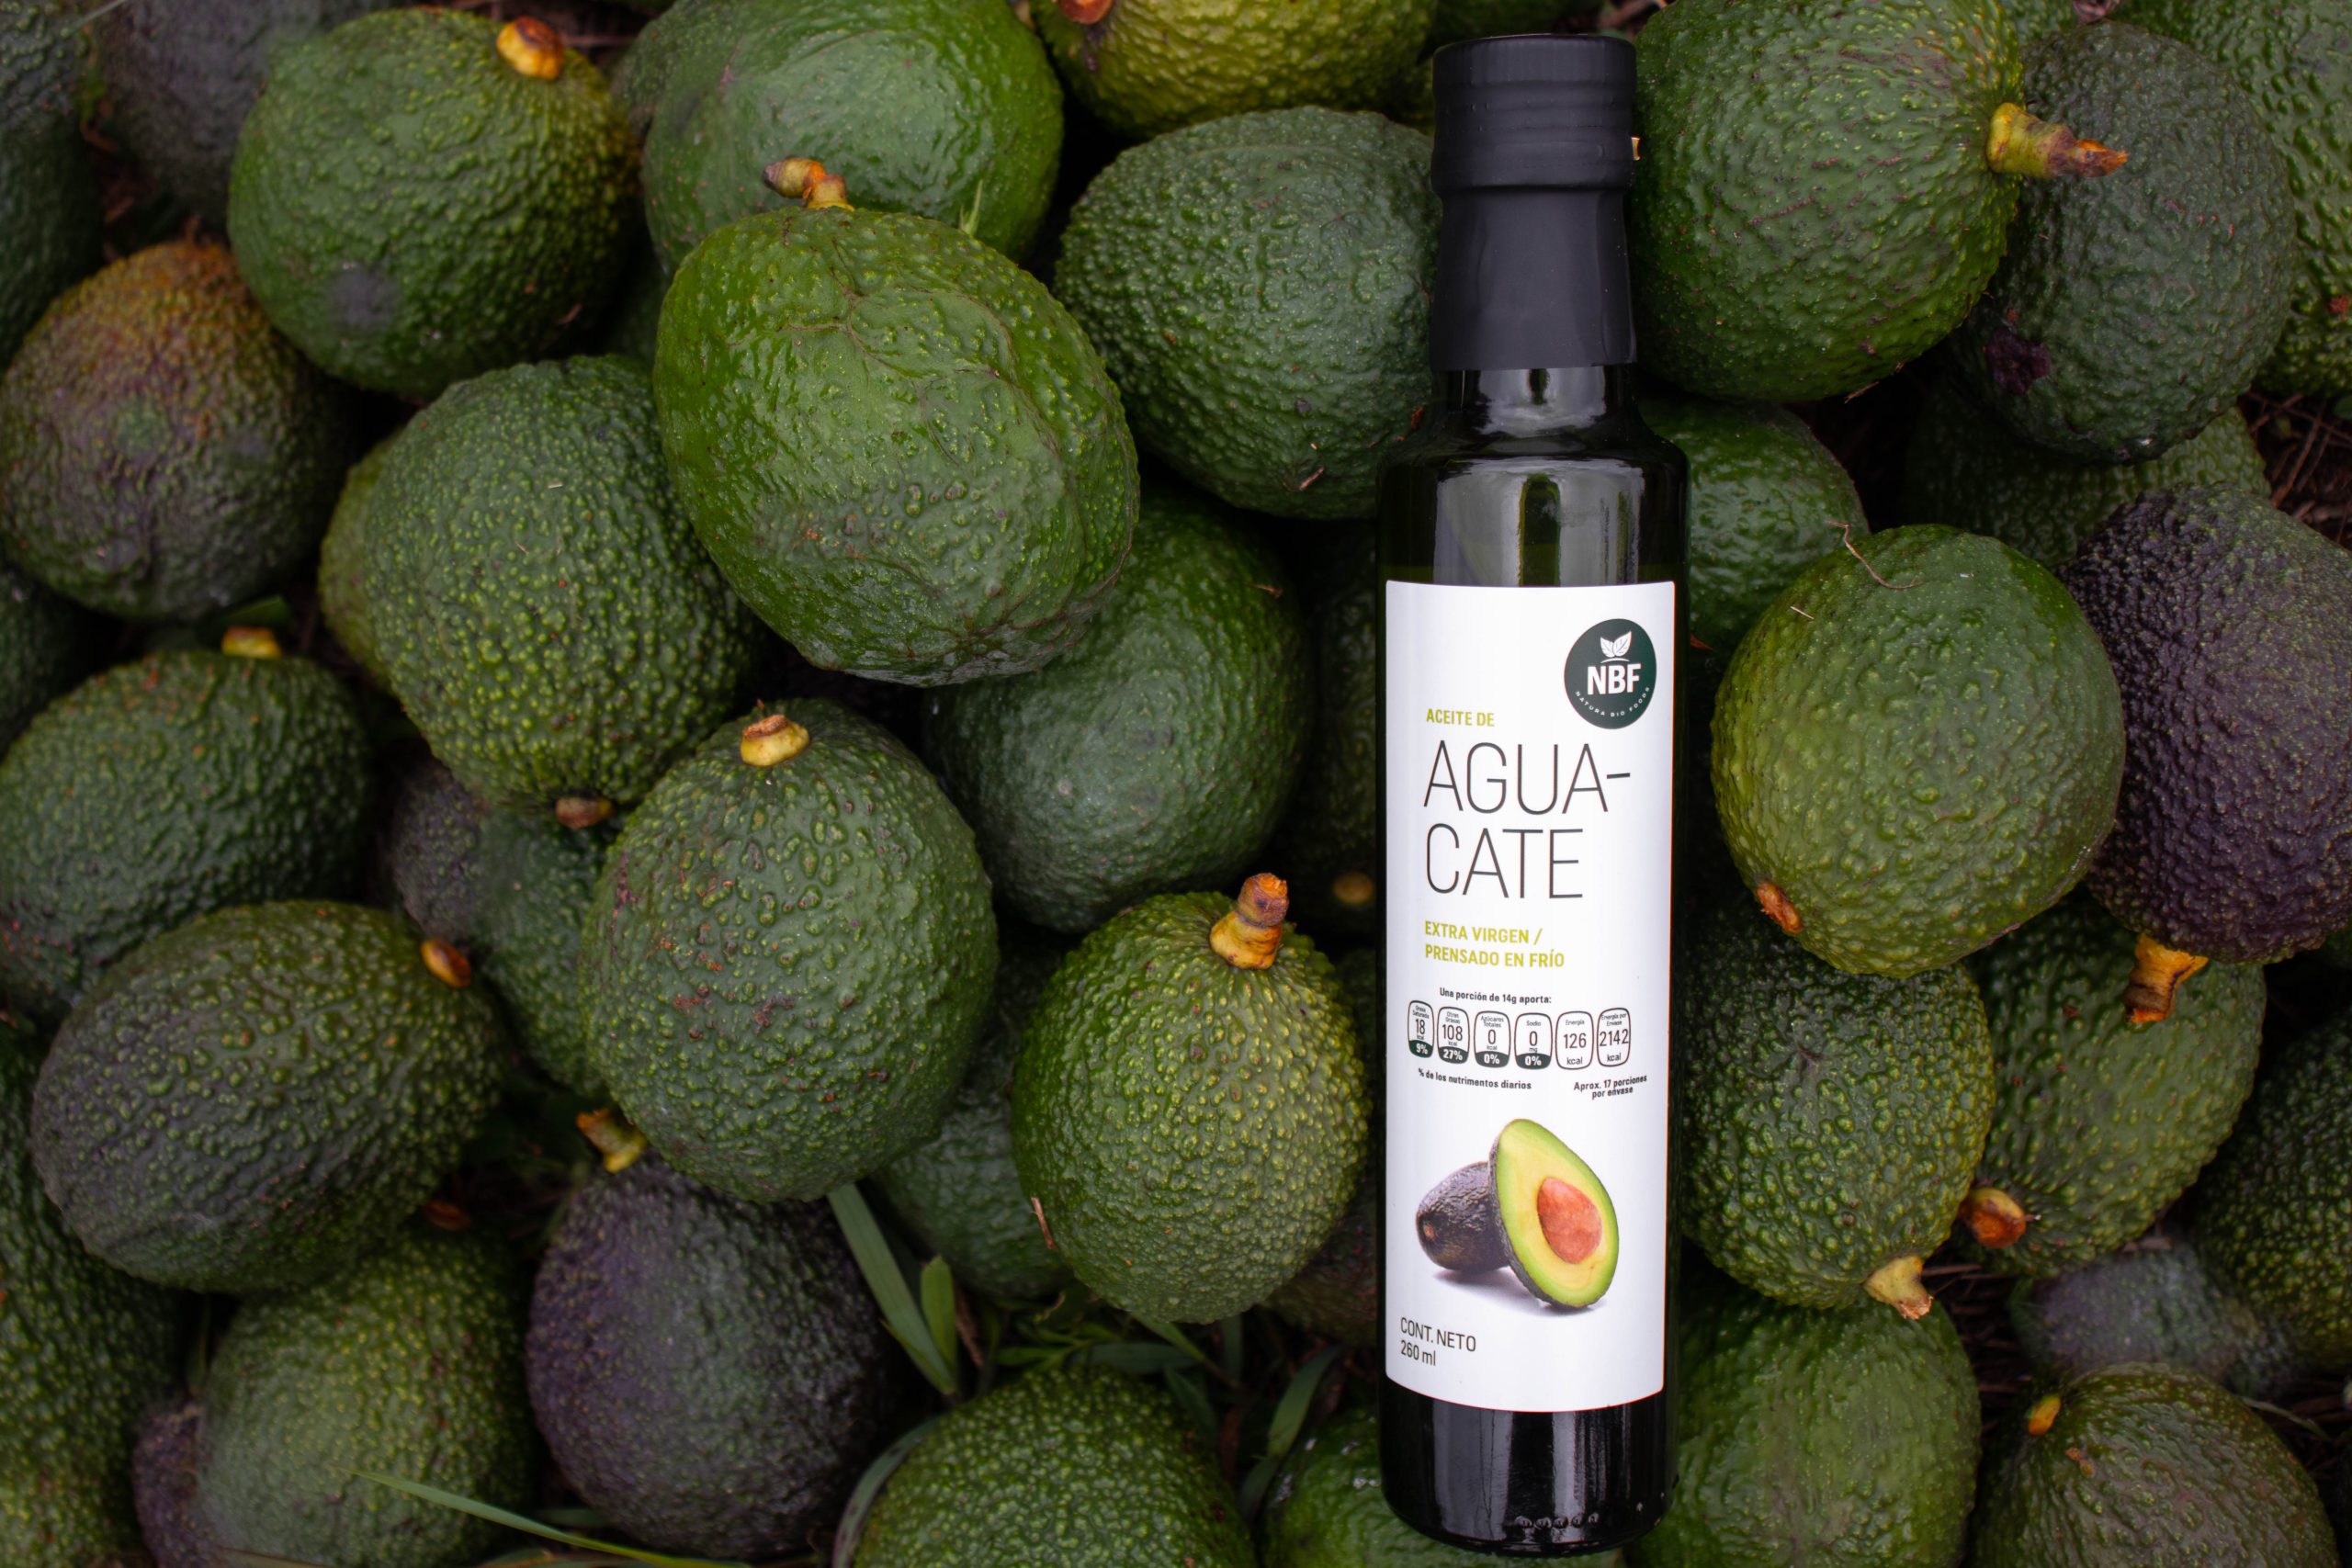 Aceite de Aguacate scaled